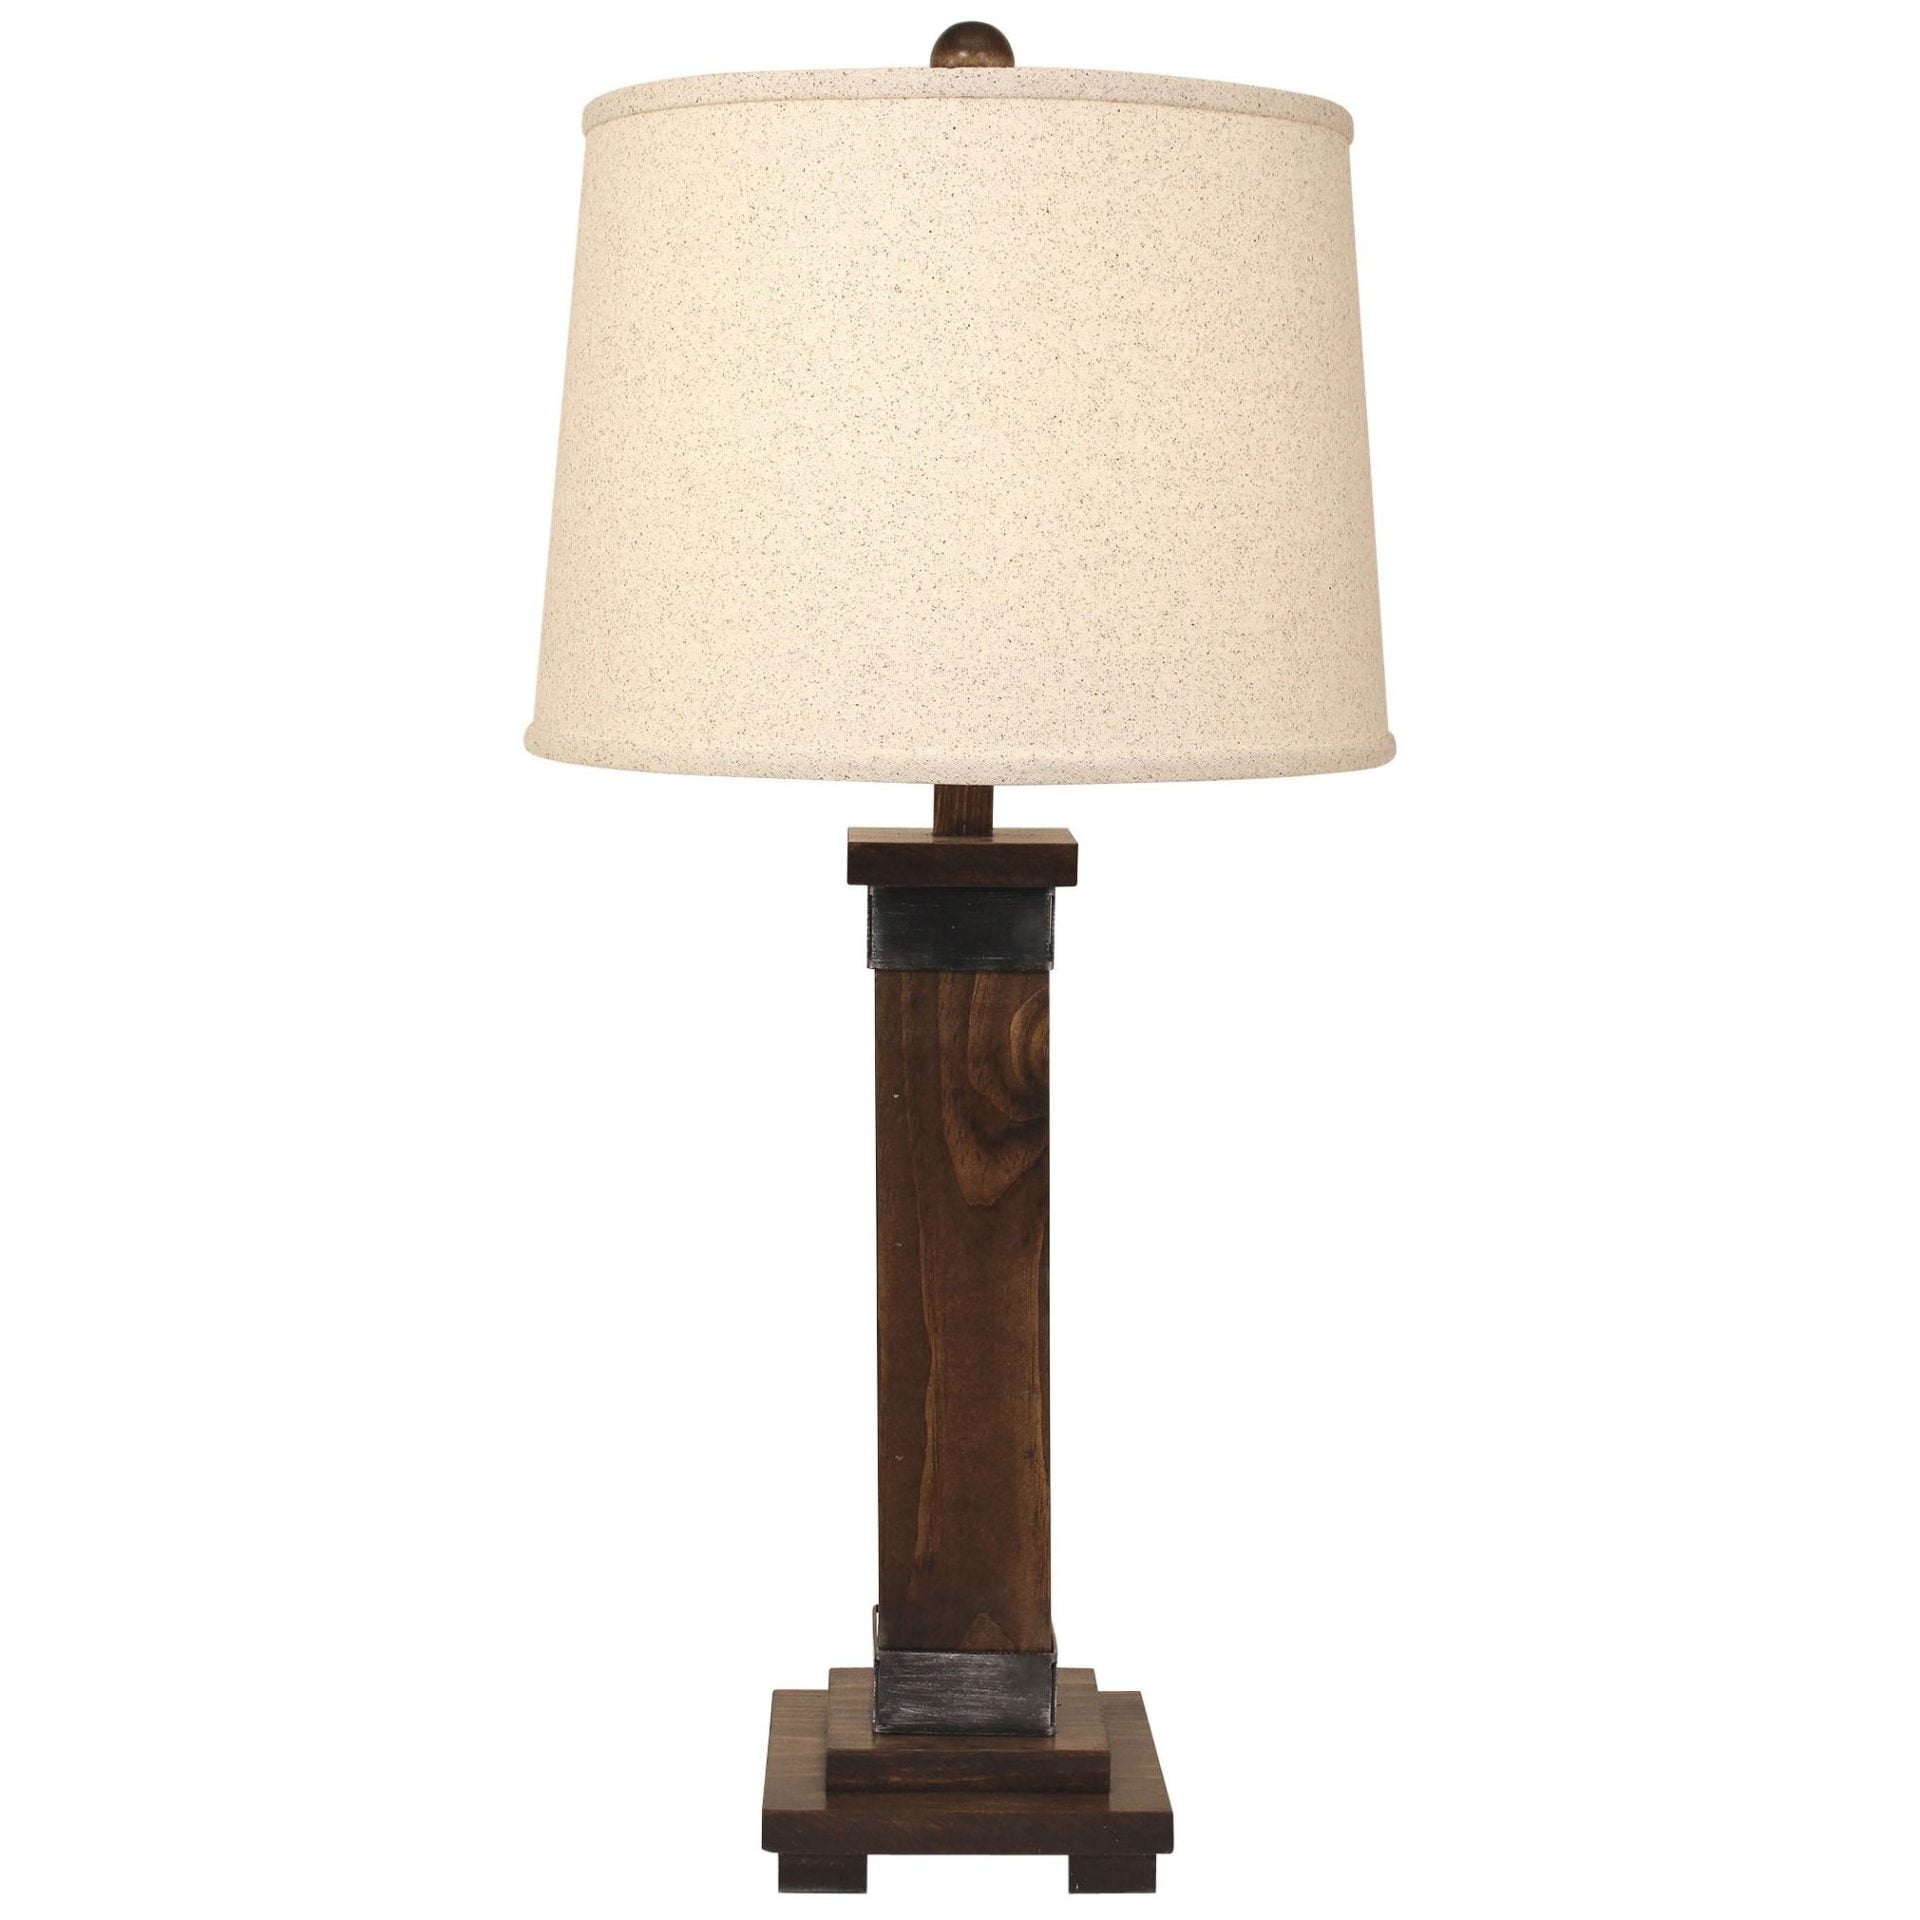 Mission Style Table Lamp with Steel Accents